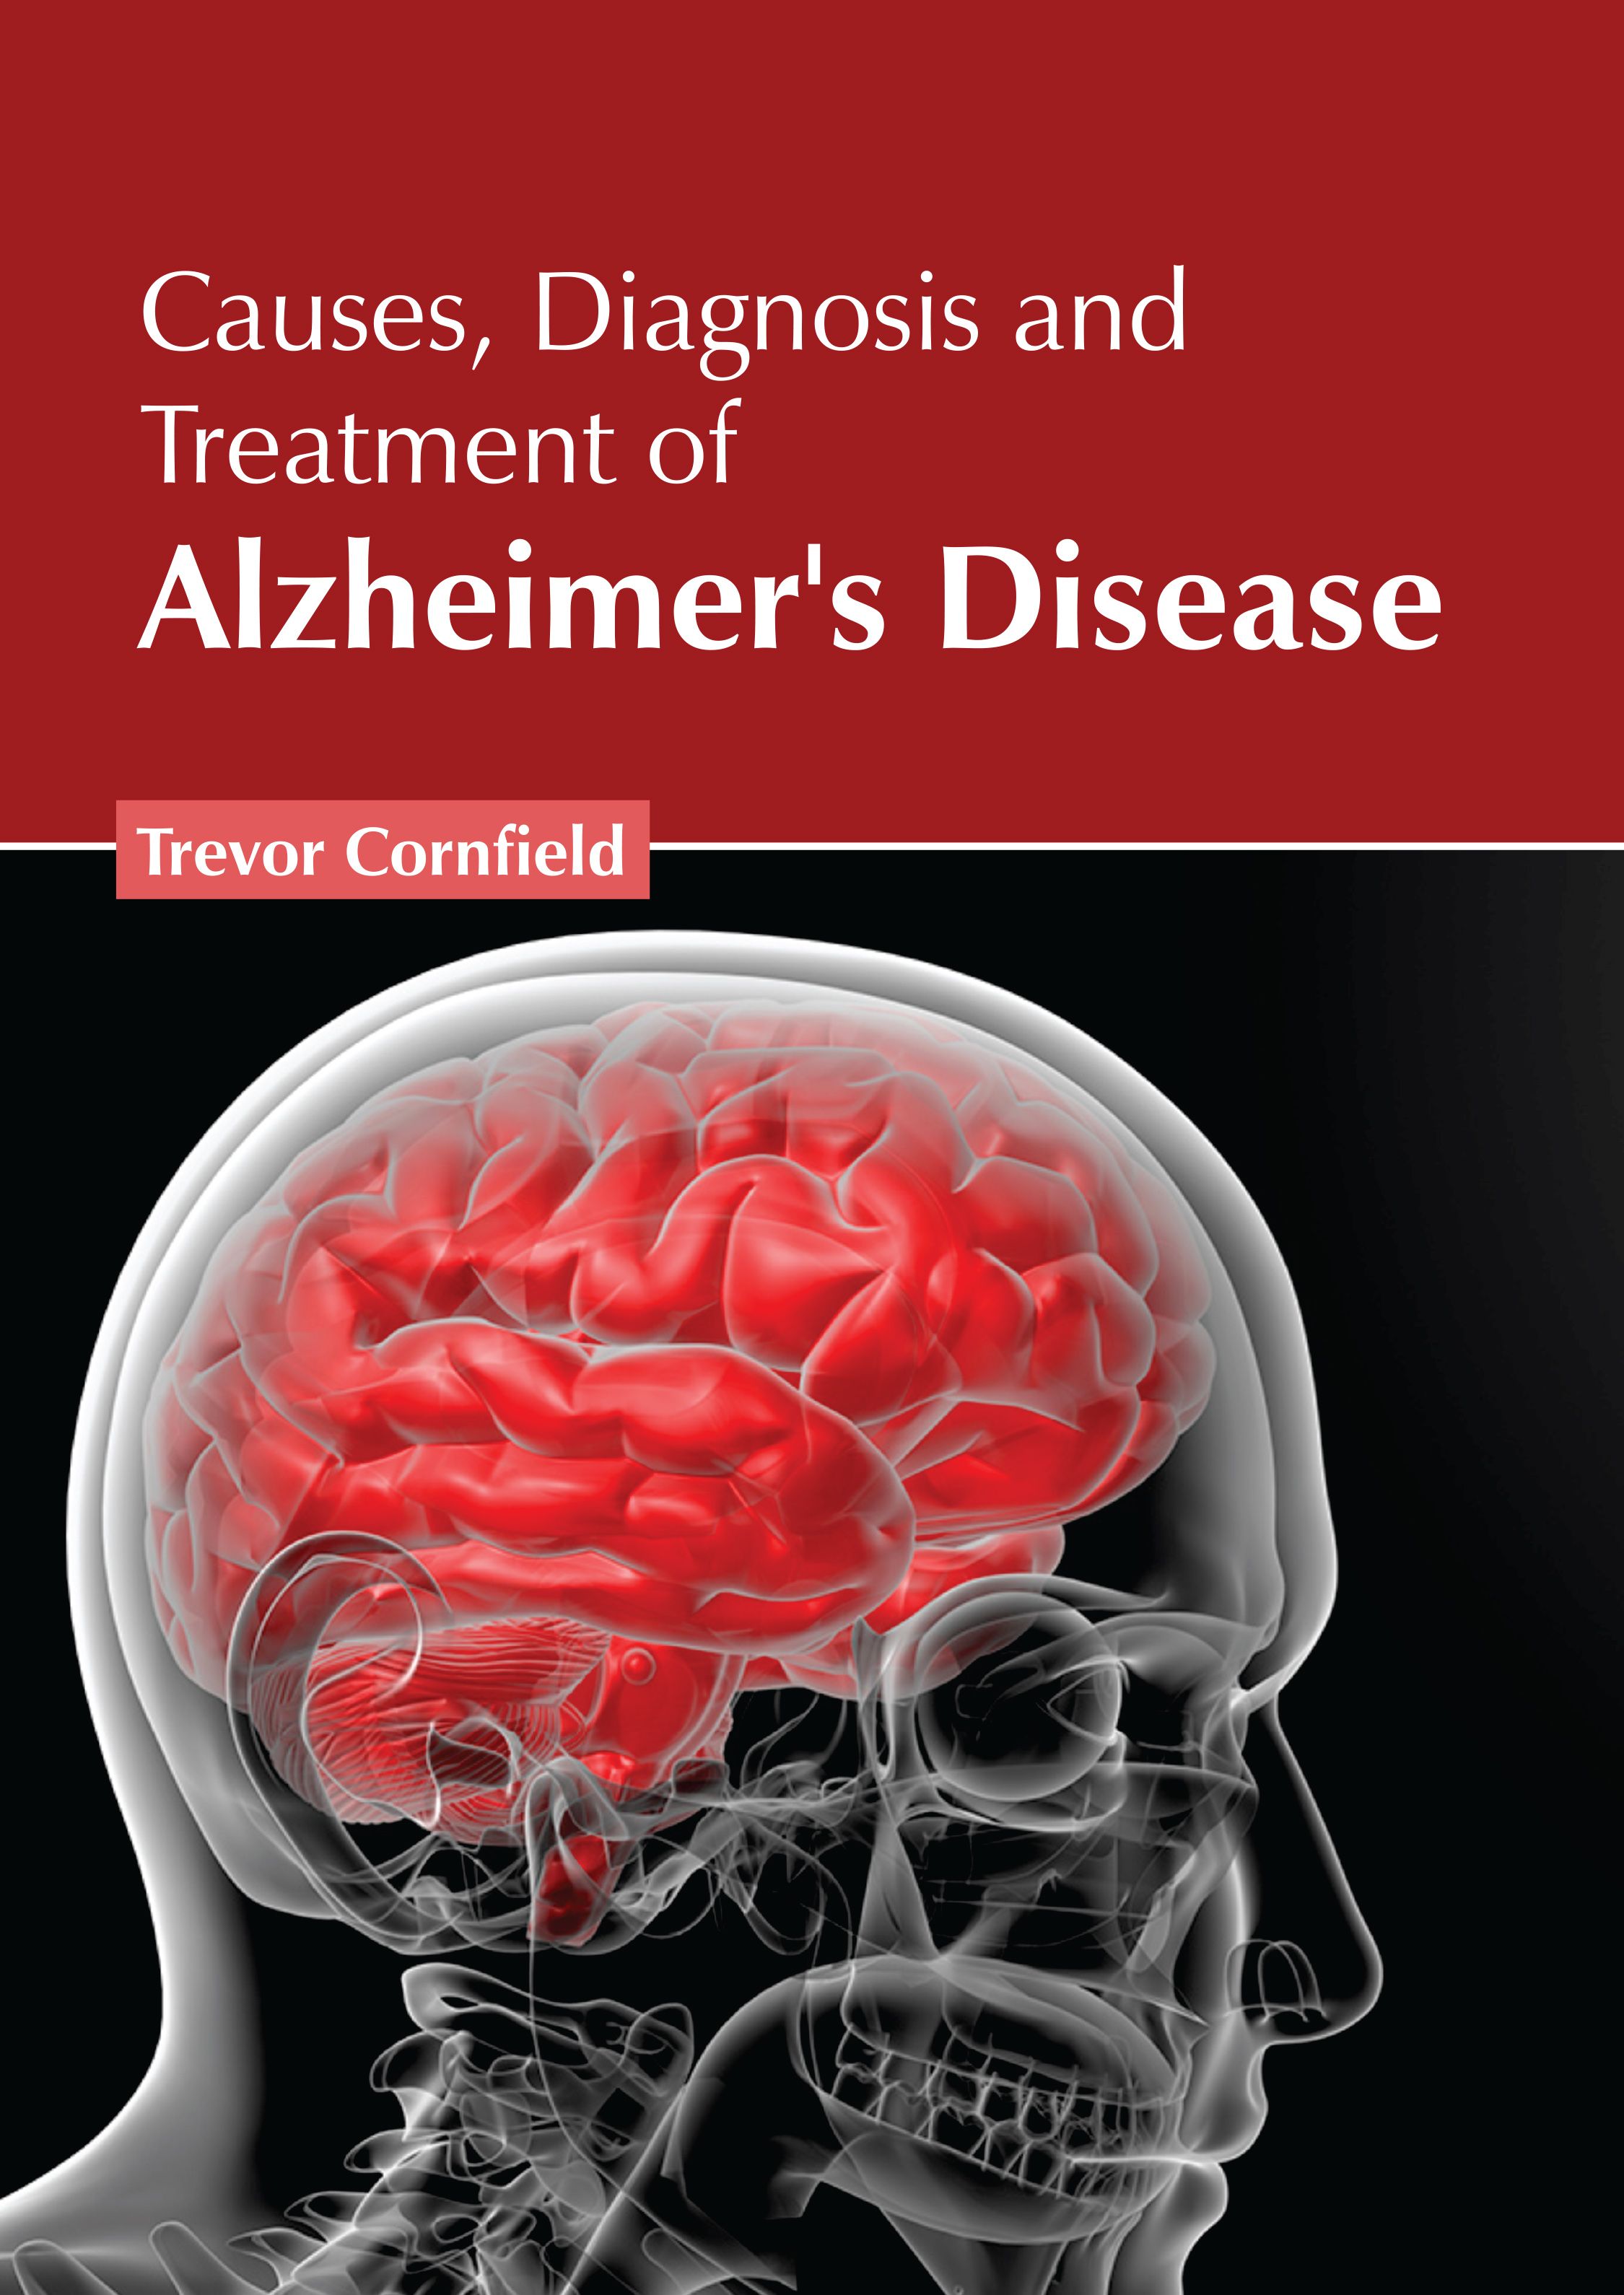 

exclusive-publishers/american-medical-publishers/causes-diagnosis-and-treatment-of-alzheimer-s-disease-9781639278657